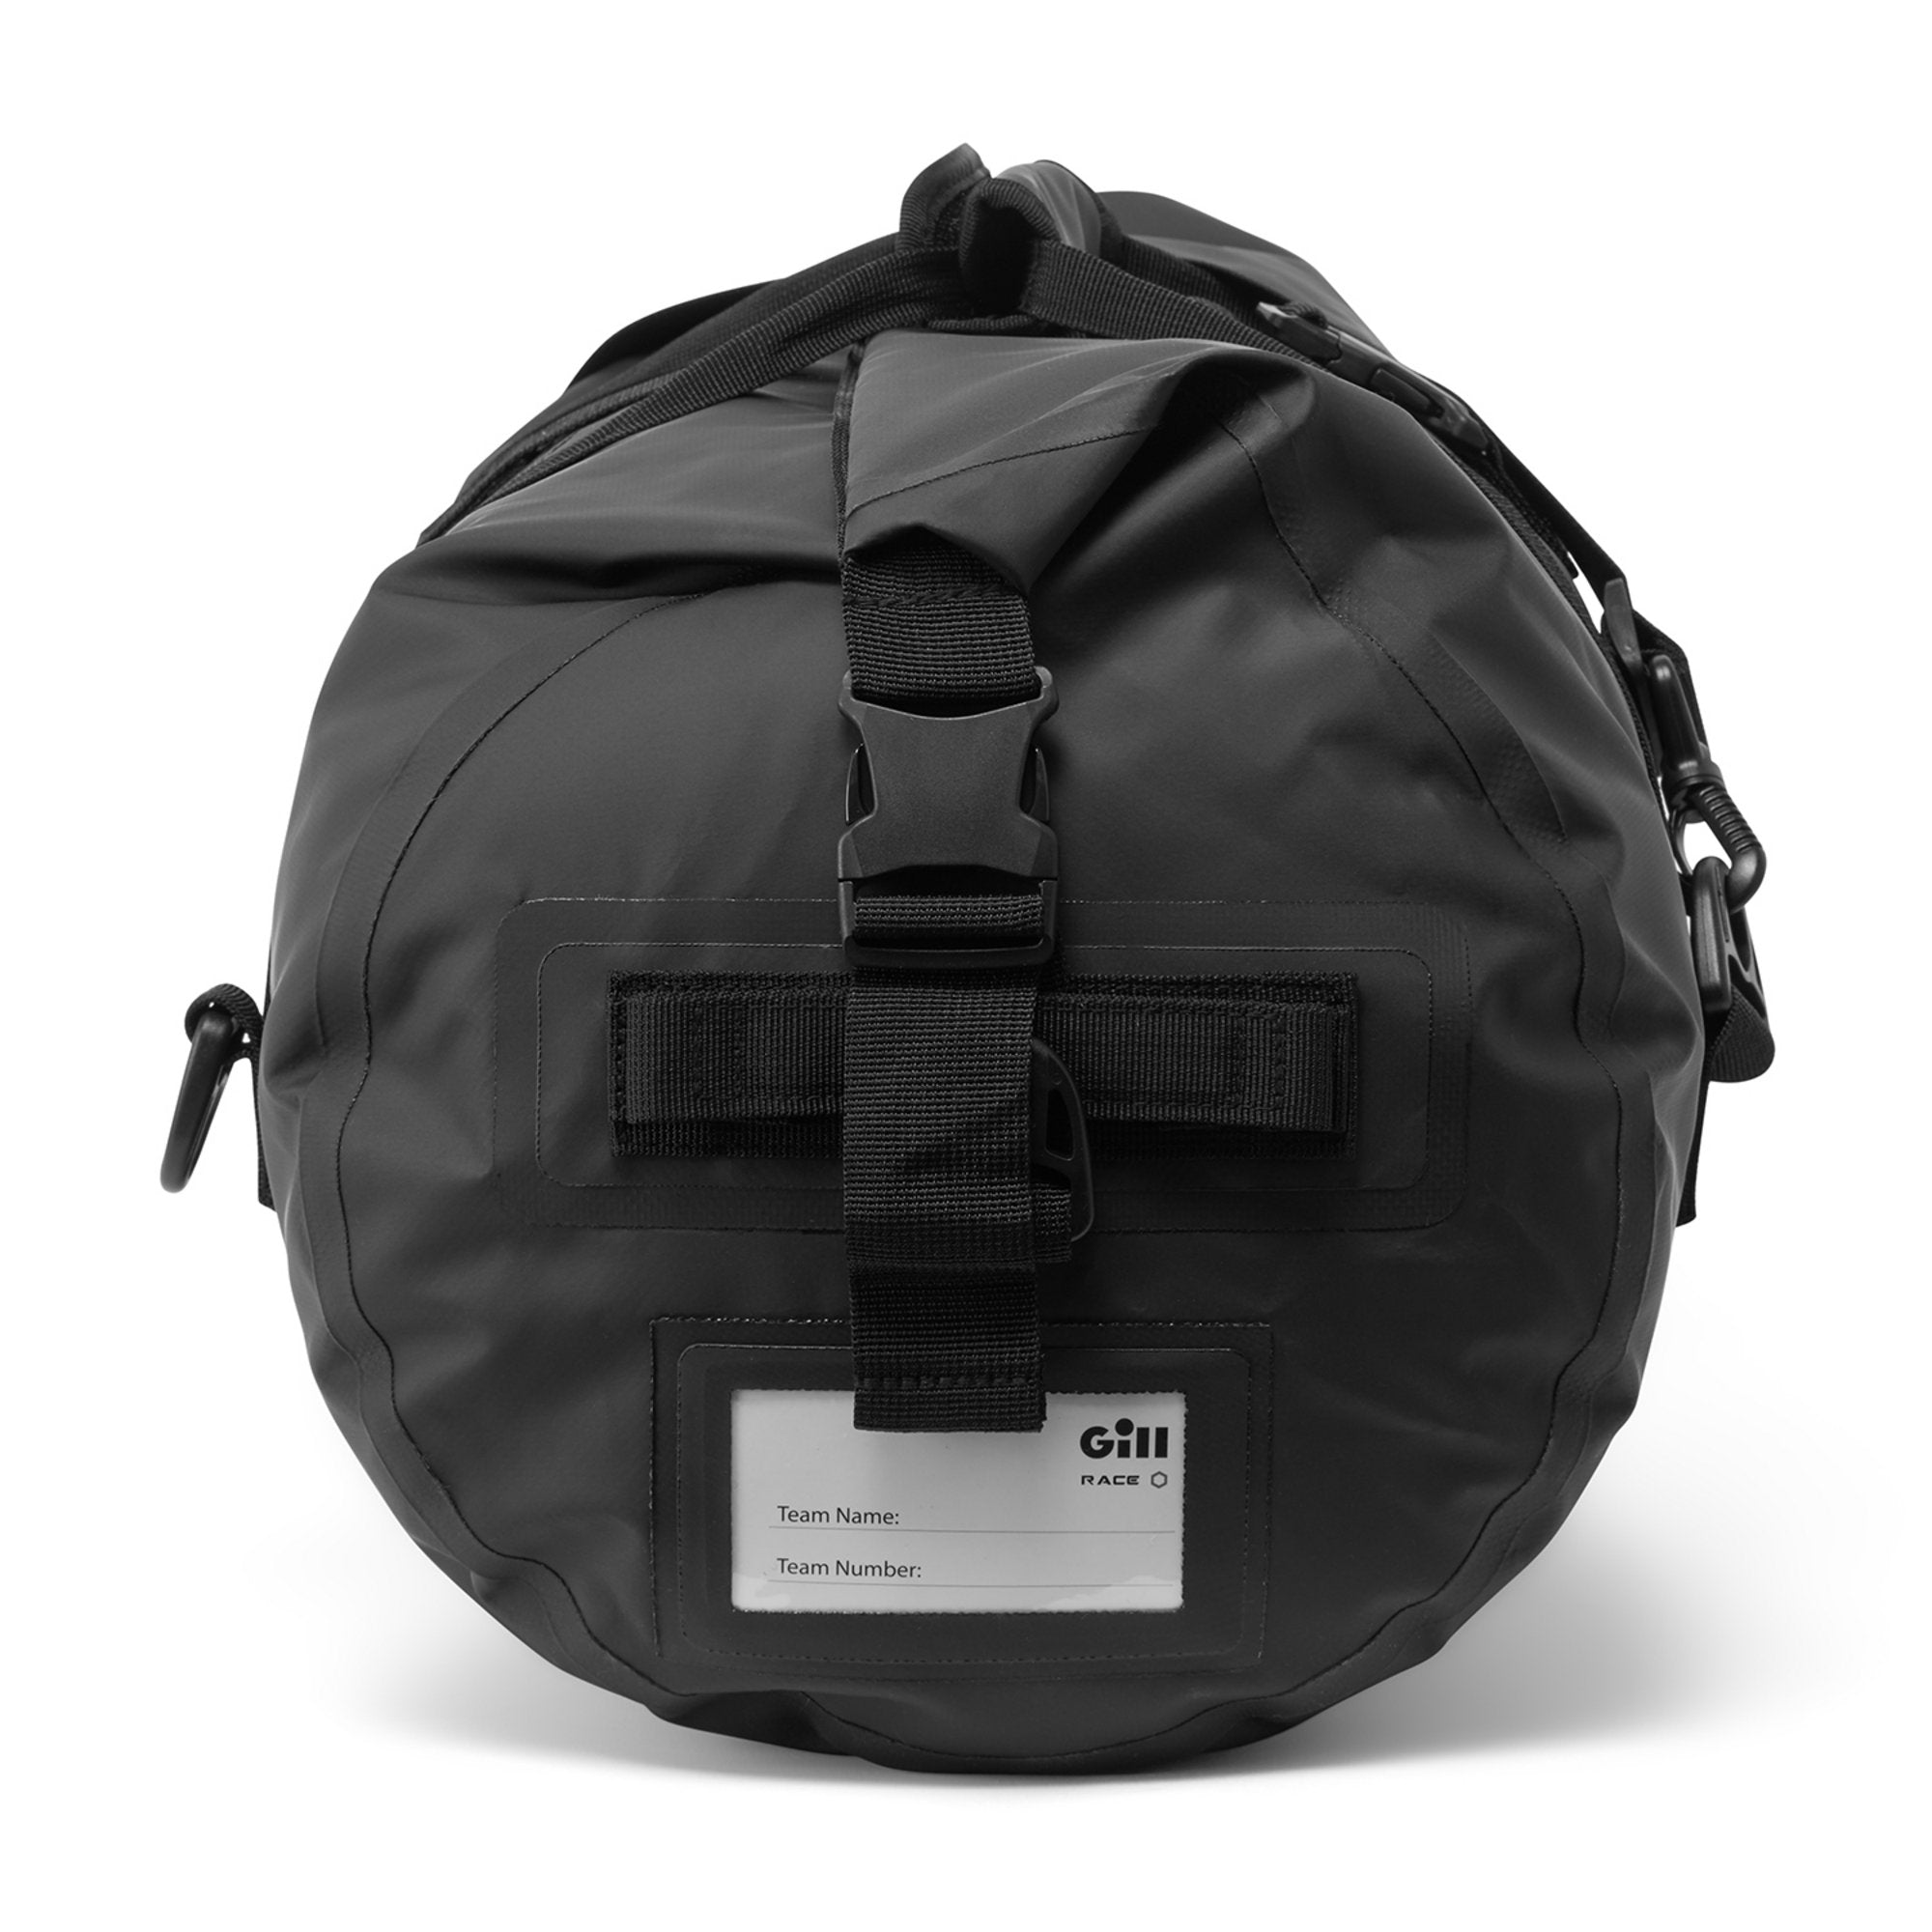 Gill 10L Voyager Duffel Bag - Special Edition